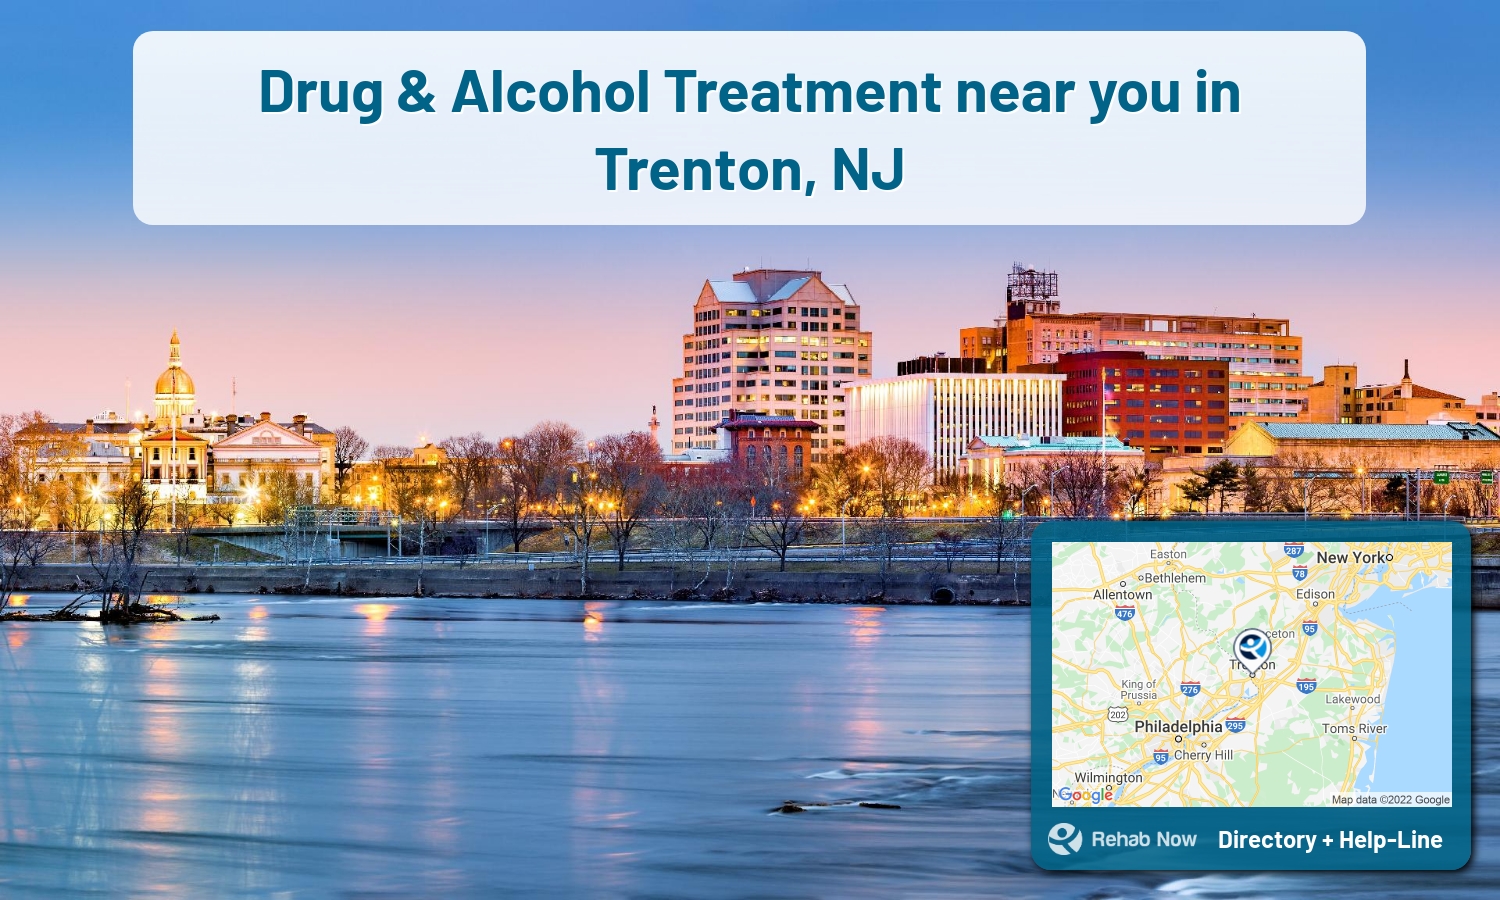 Ready to pick a rehab center in Trenton? Get off alcohol, opiates, and other drugs, by selecting top drug rehab centers in New Jersey